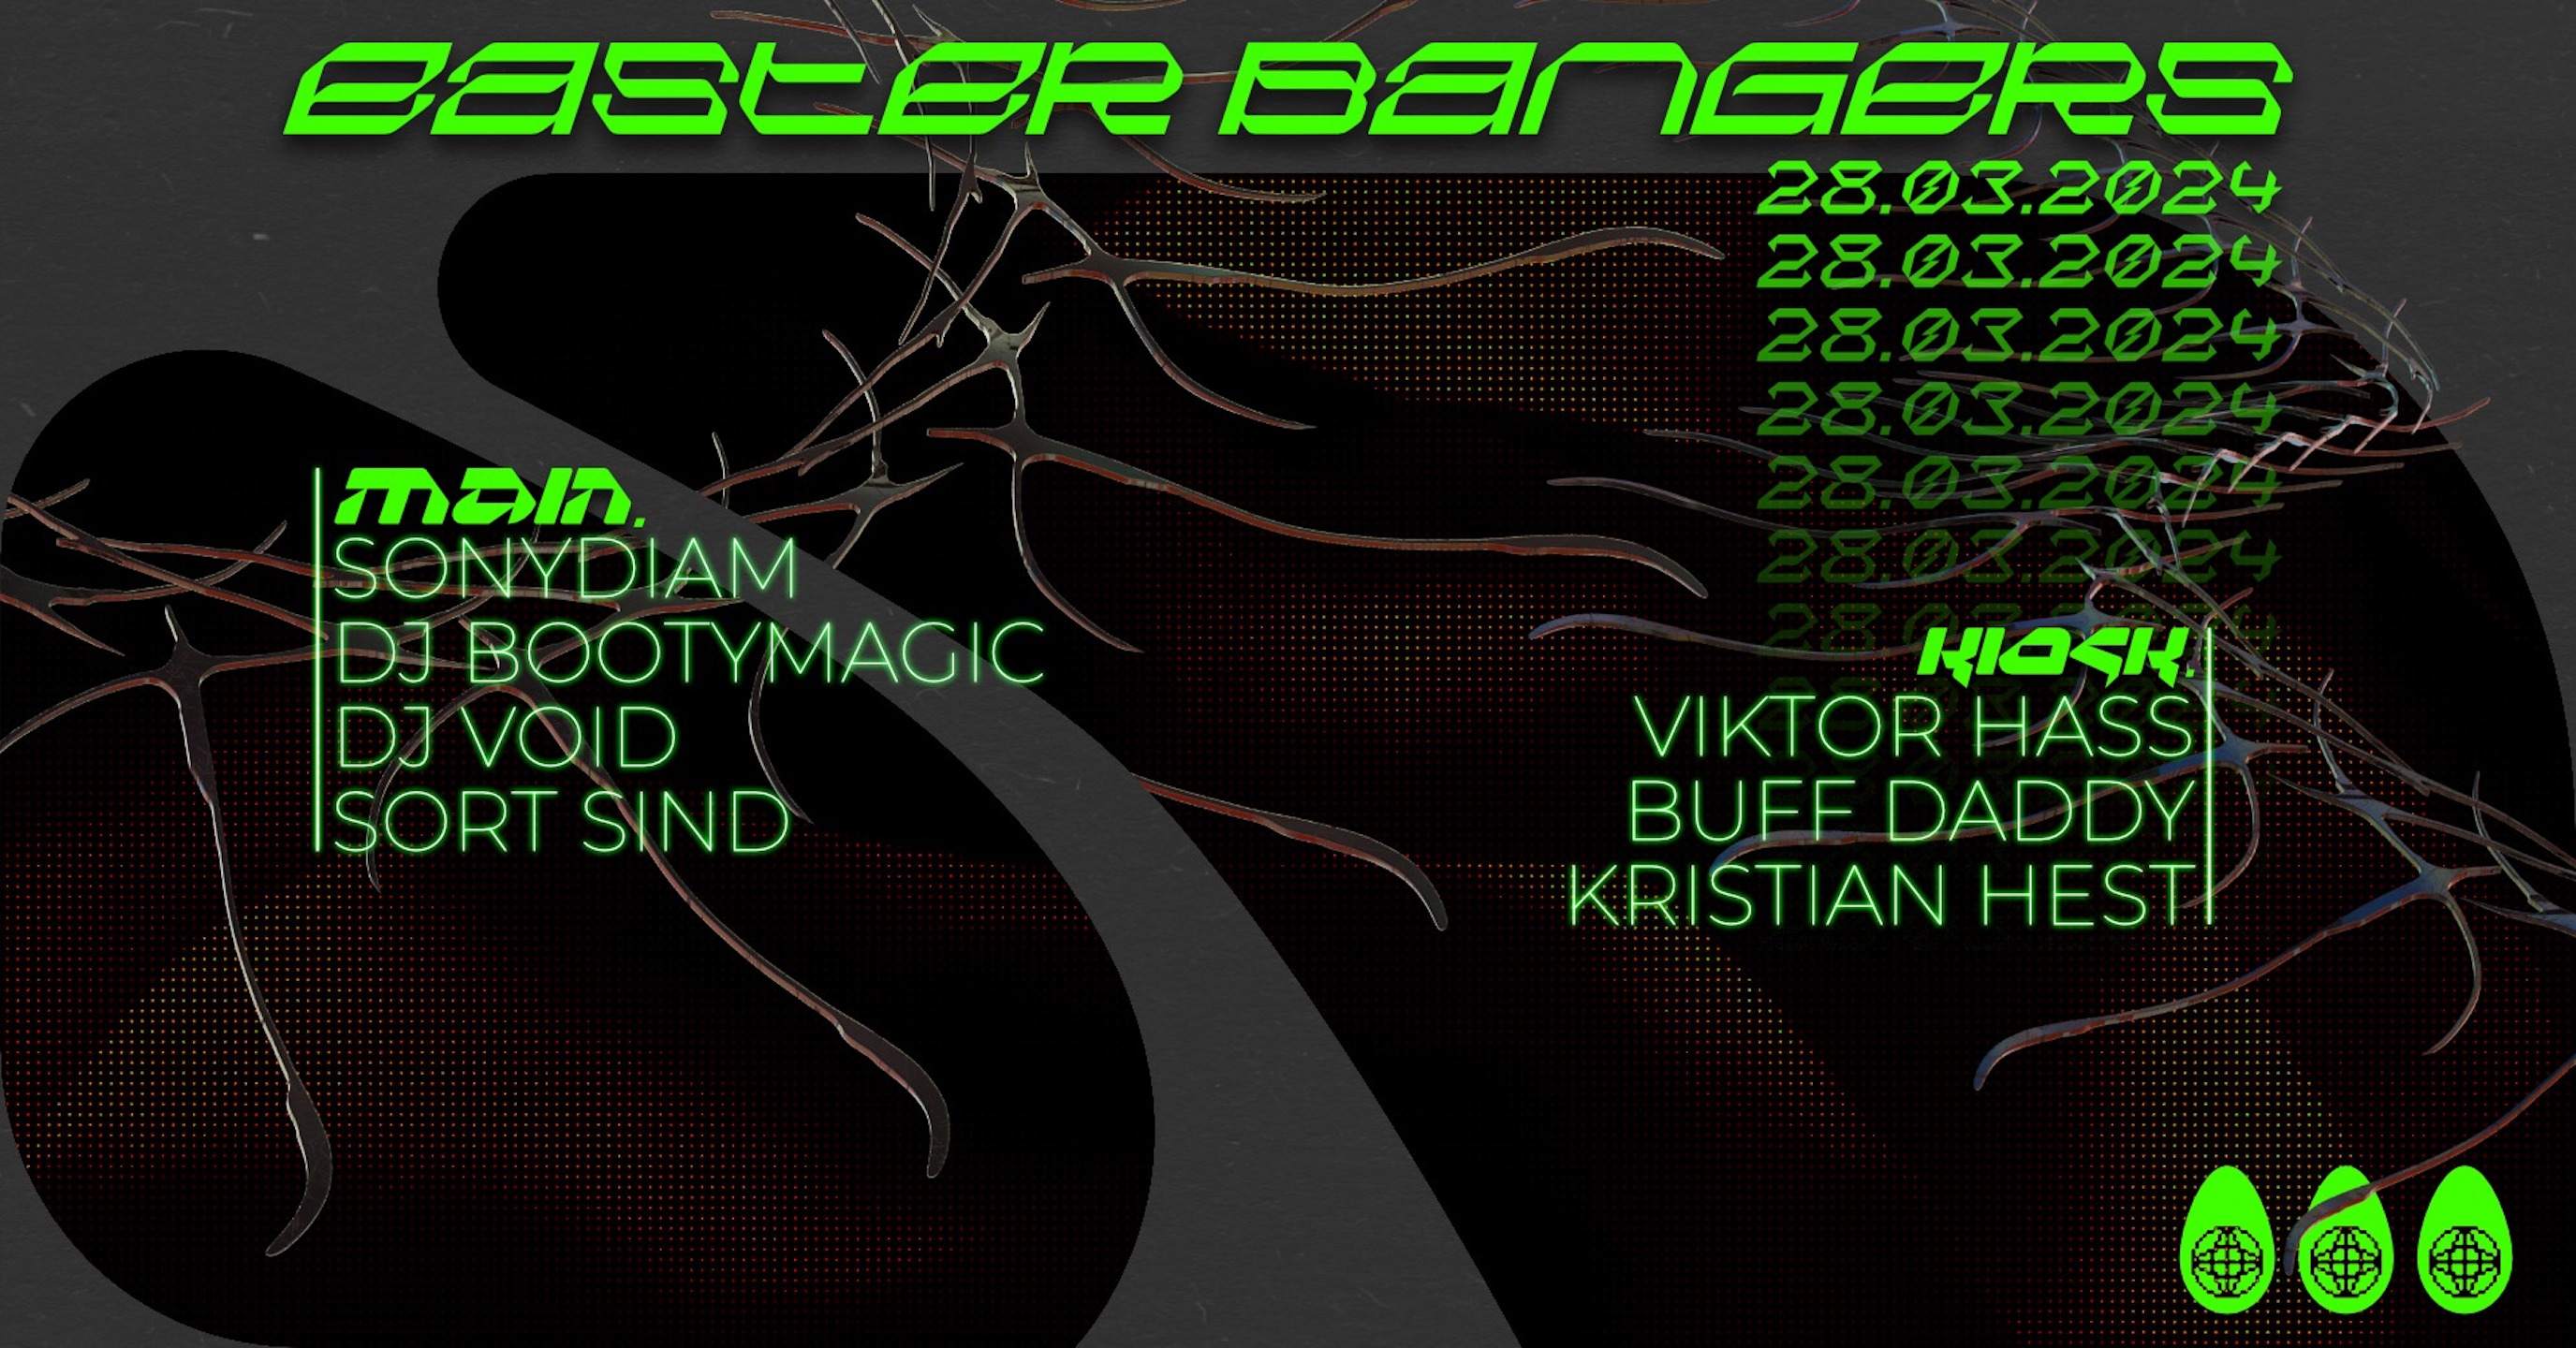 Easter Bangers at Module - フライヤー表